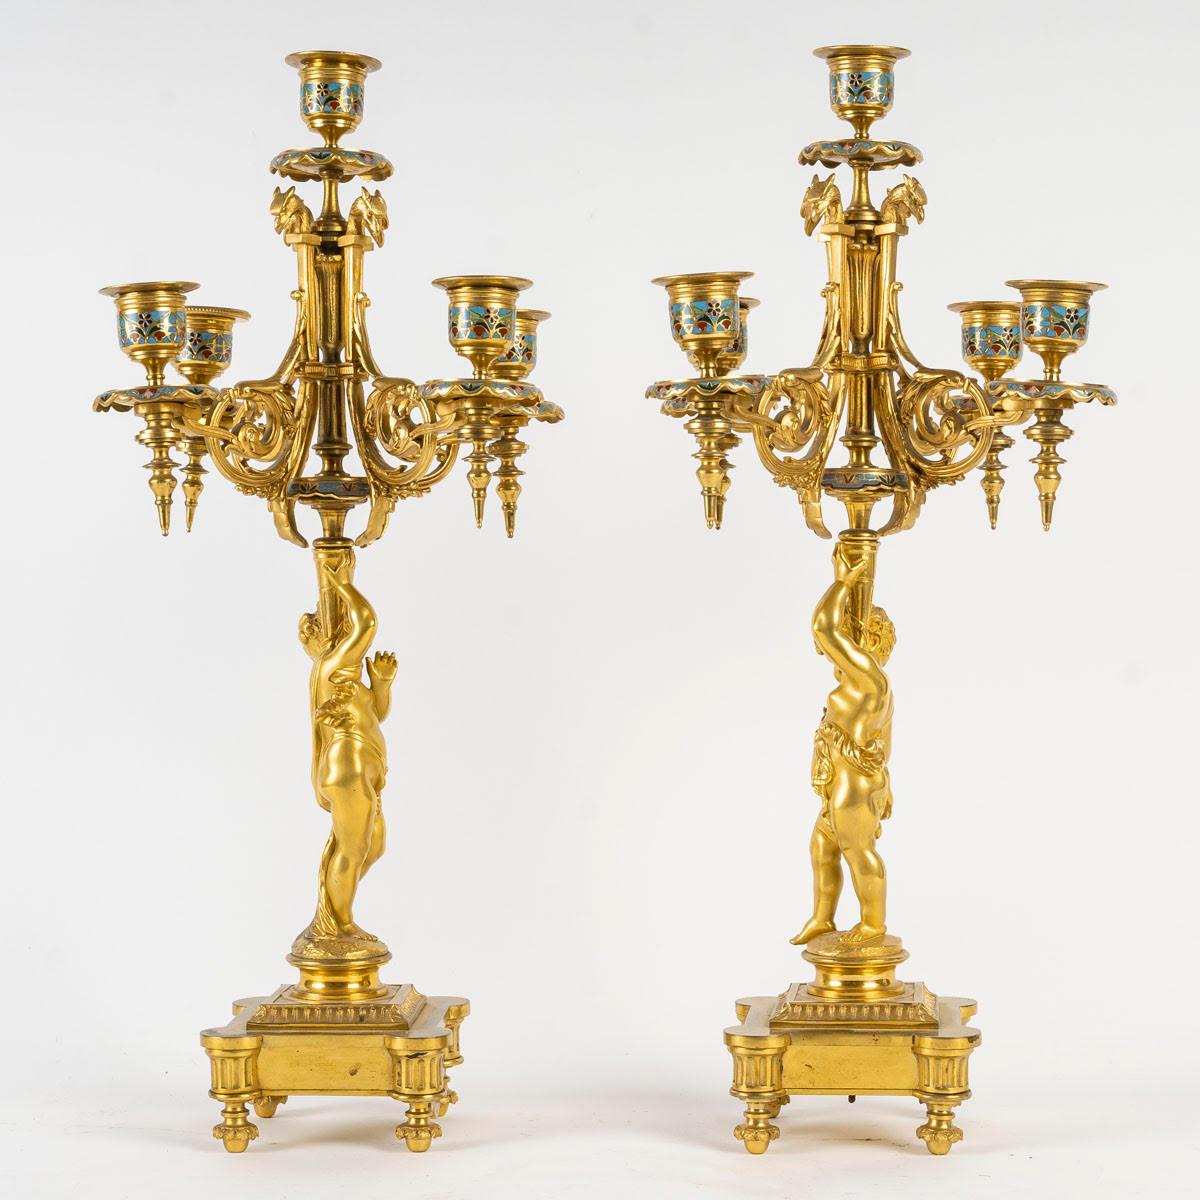 19th Century Mantelpiece and Candelabras in Gilt and Cloisonné Bronze, Napoleon Period. For Sale